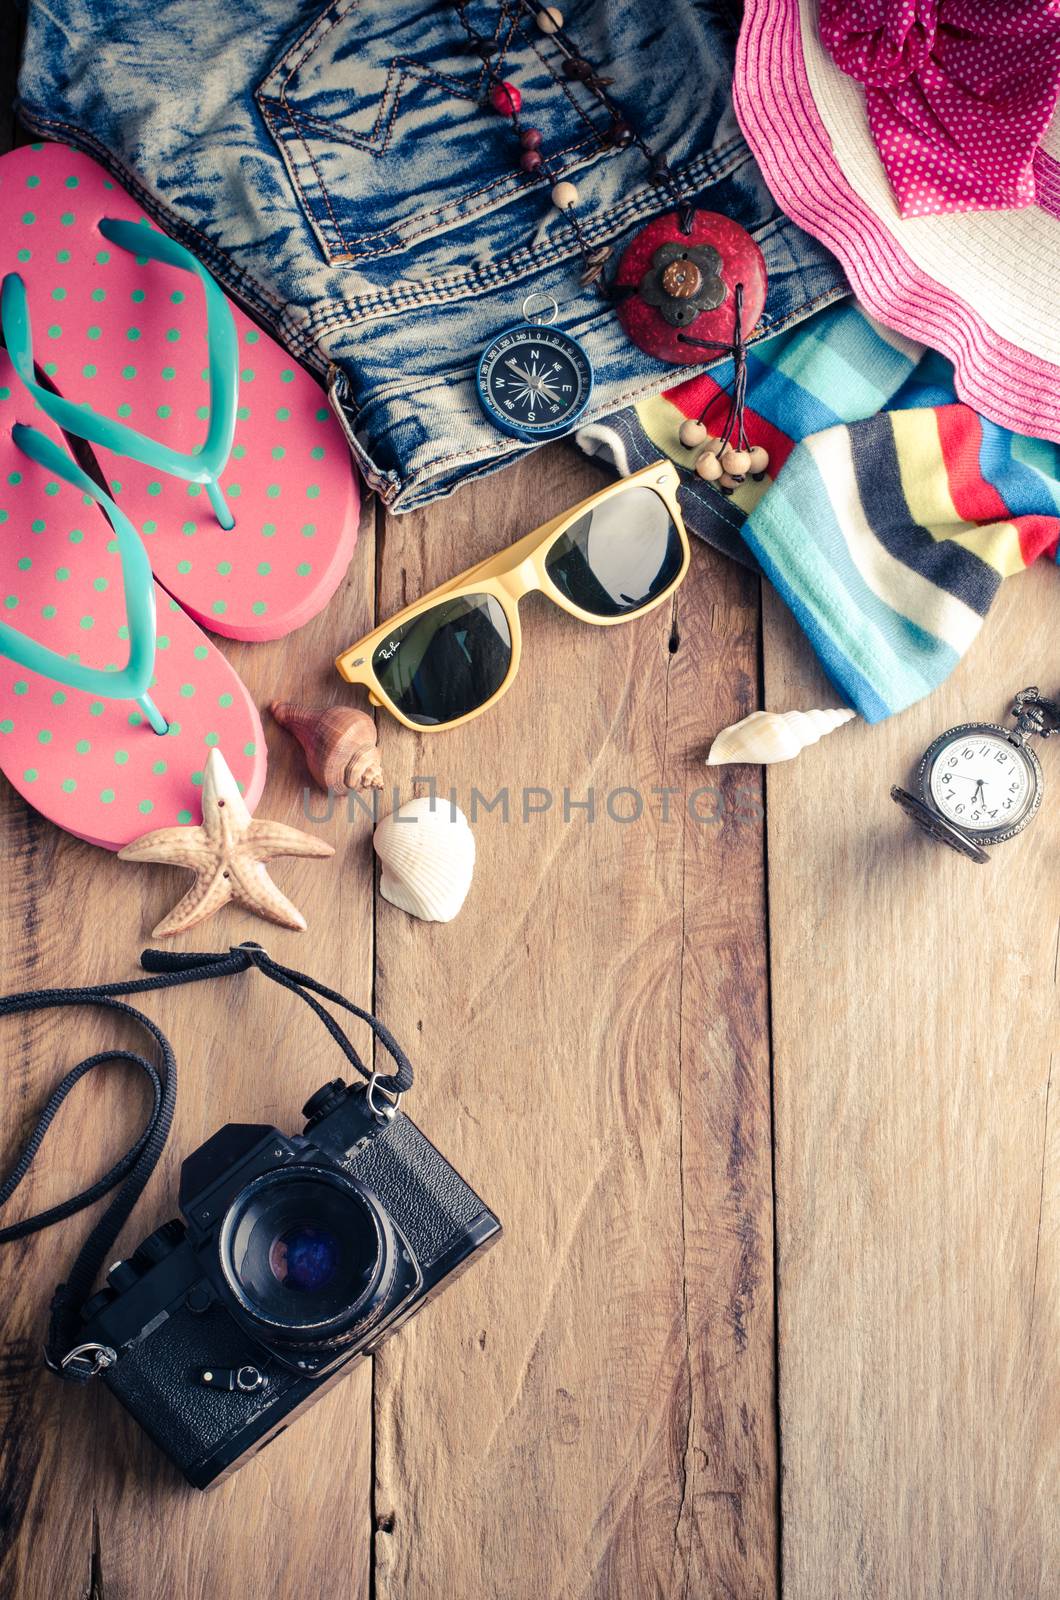 Travel Clothing accessories Apparel along for the trip by photobyphotoboy